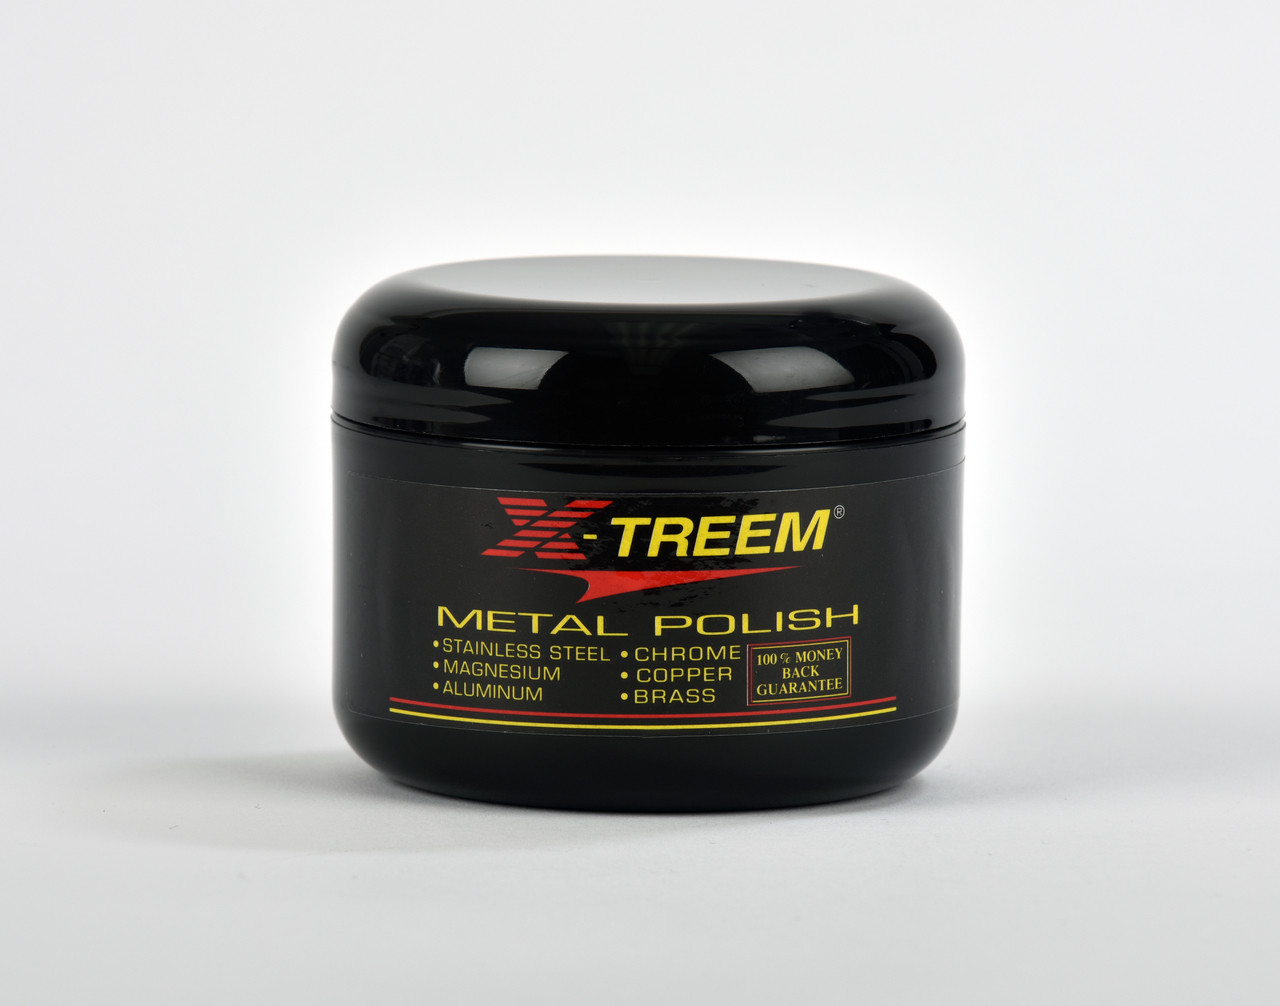 X-treem Metal Polish is a unique material wadding that will polish and protect all metal surfaces. It is very effective at removing water spots, brake dust and chemical stains while restoring the metal to a bright, shiny finish. X-Treem application material is a great alternative to messy chemical removal systems currently on the market.